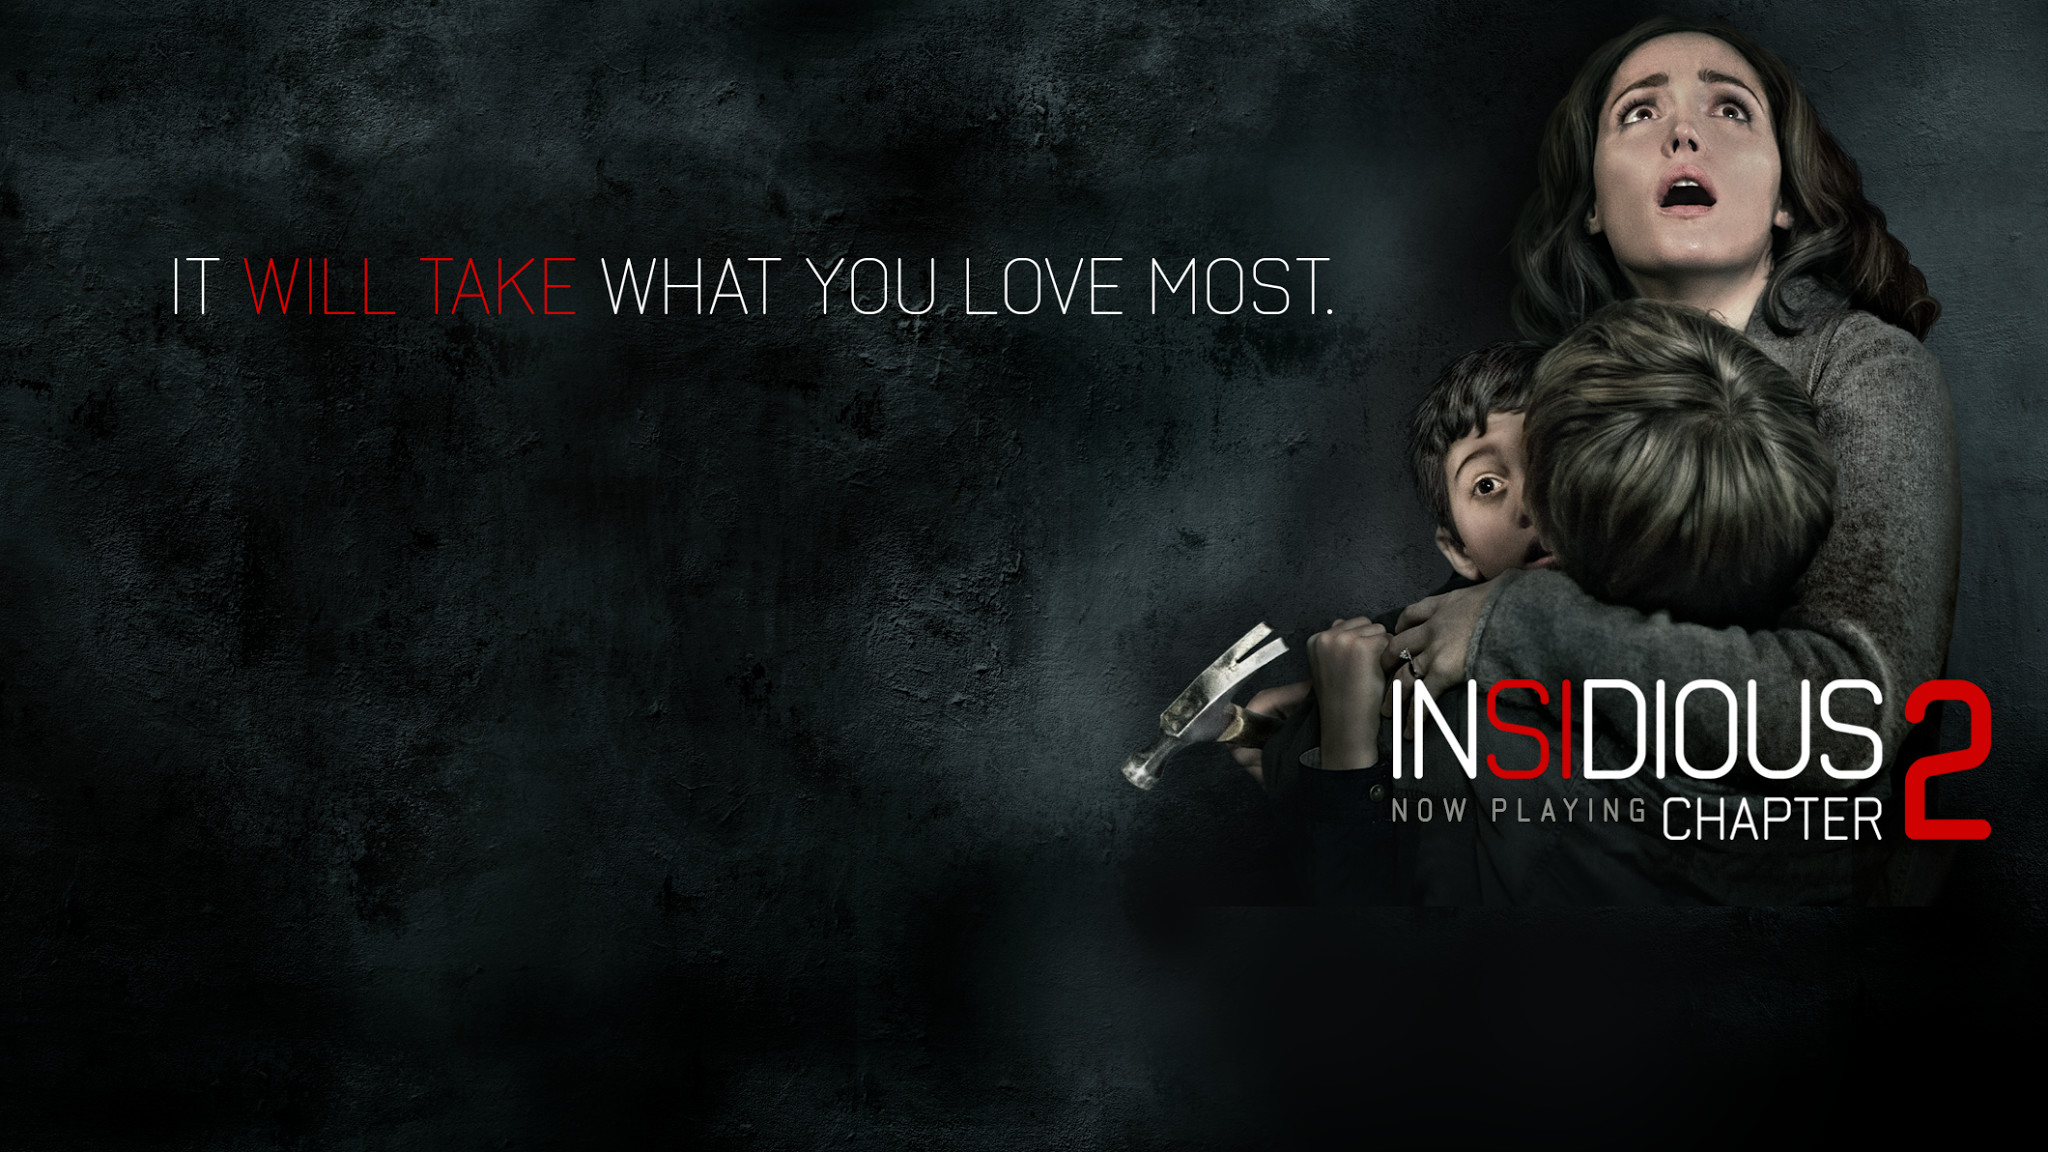 Download Insidious Horror Movie Poster HD Wallpaper. Search more high